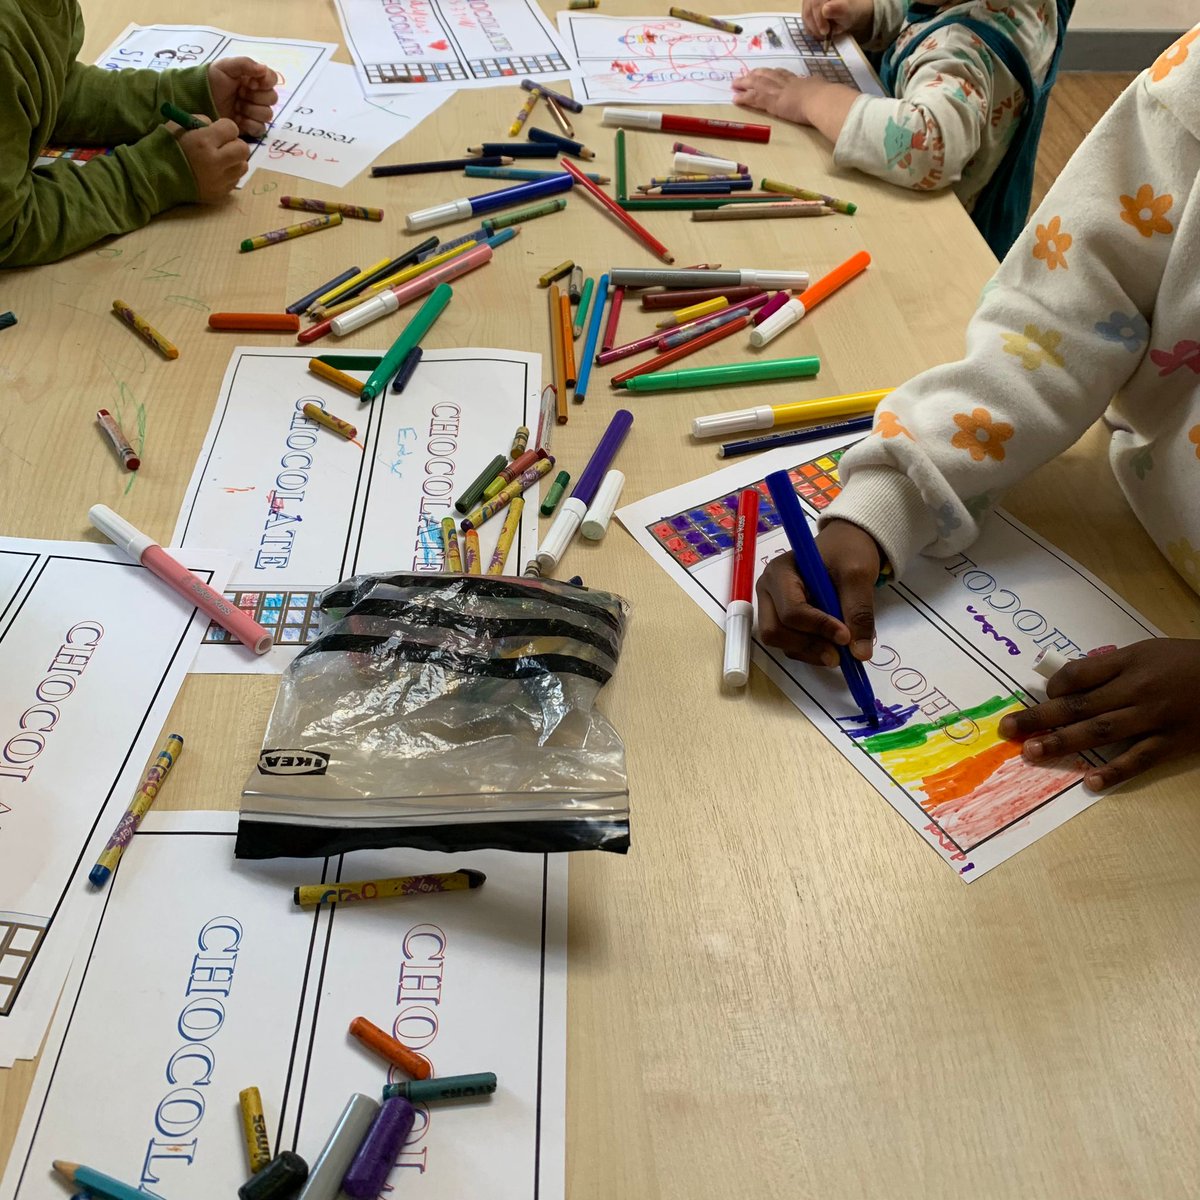 Another fun packed Craft and storytime session at Northolt Library! Join the team for an Easter treasure hunt and bunny🐰craft this Saturday 30 March, 11:30am!